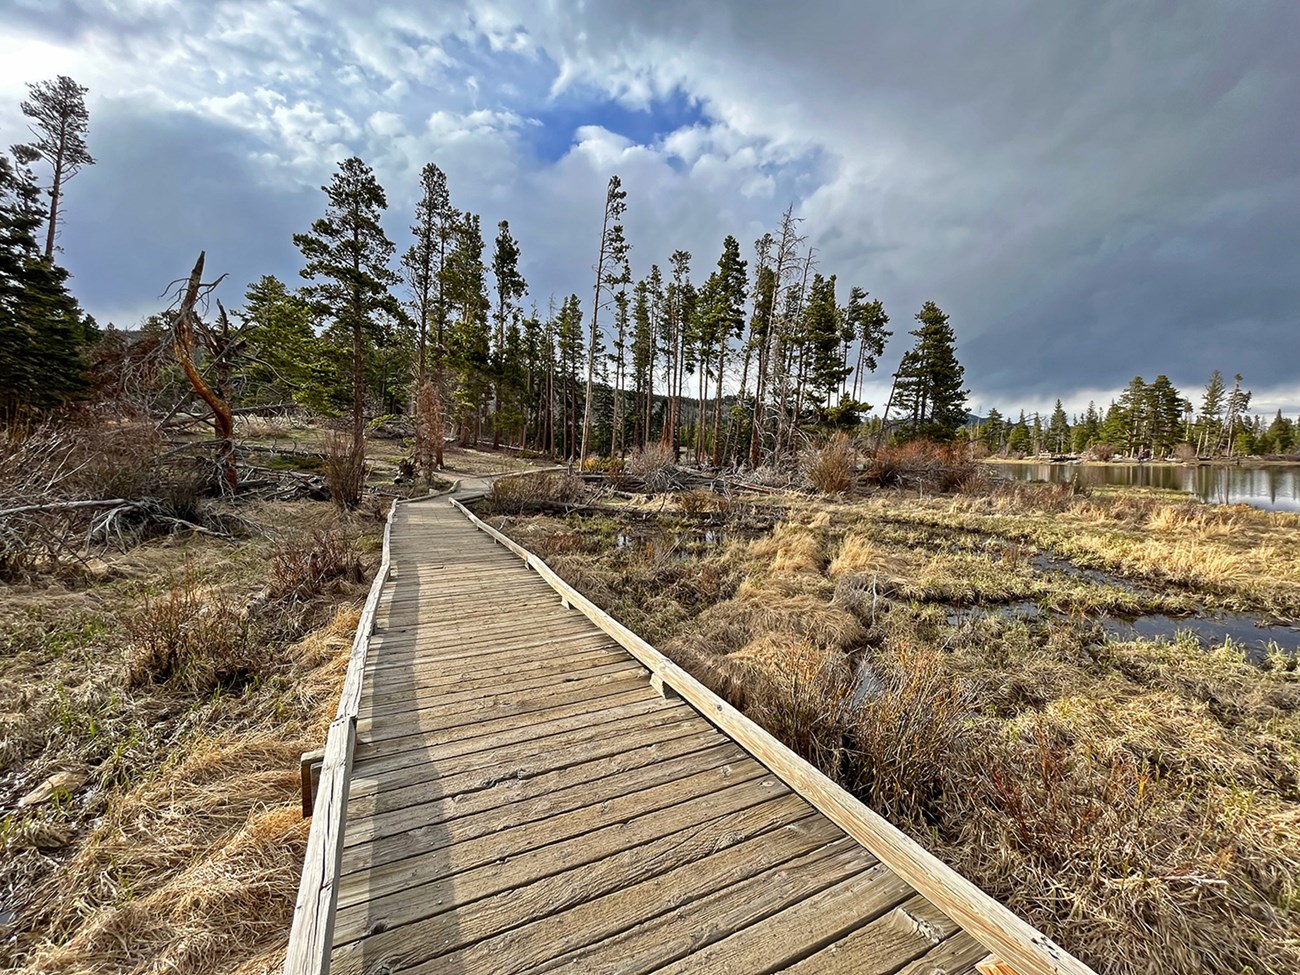 Sprague Lake Boardwalk with narrow wooden boards before the project happened